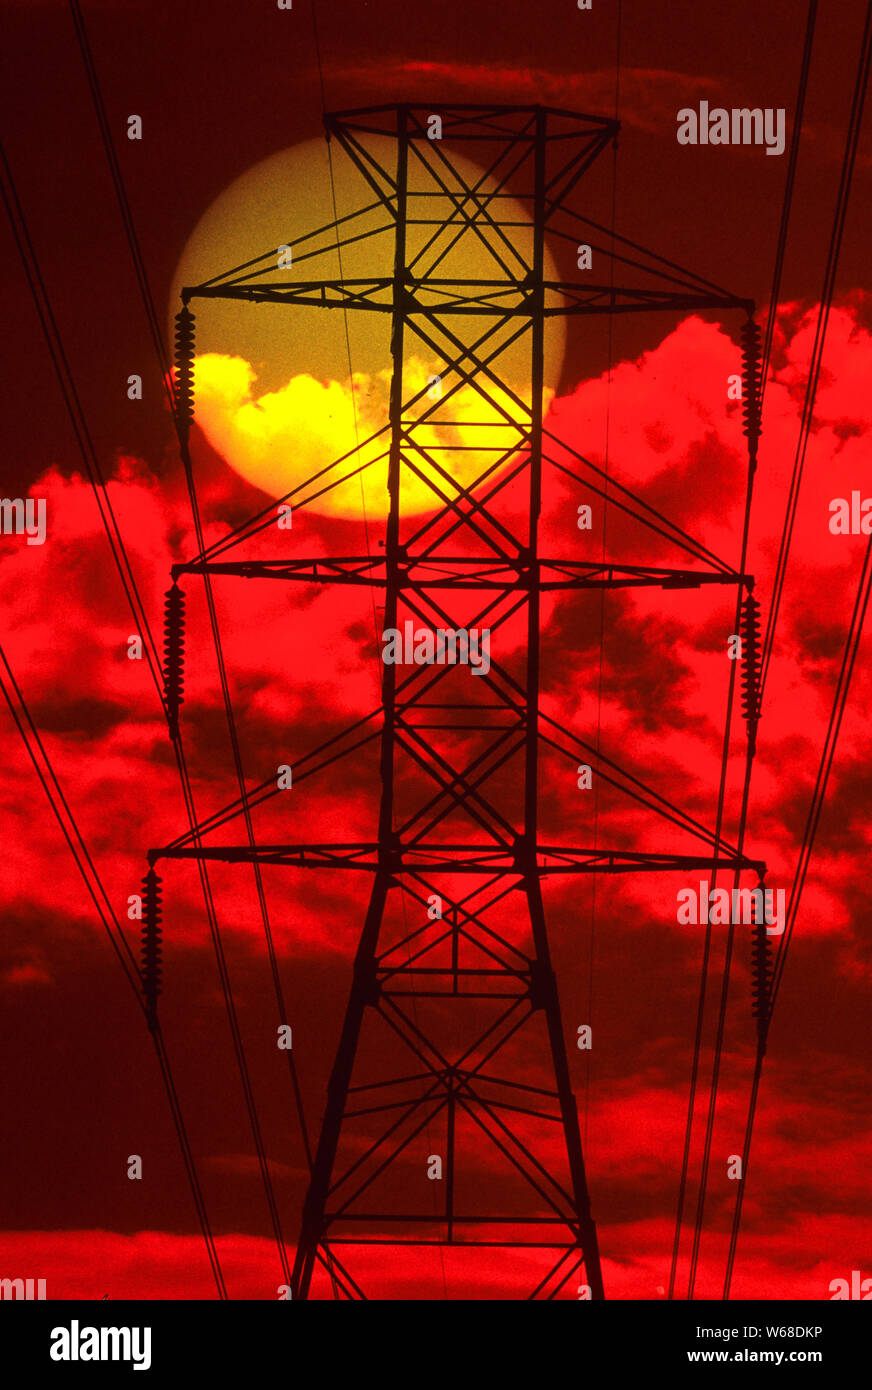 The afternoon sun as seen through some electical high tension wires (photogrphed through a red filter) Stock Photo